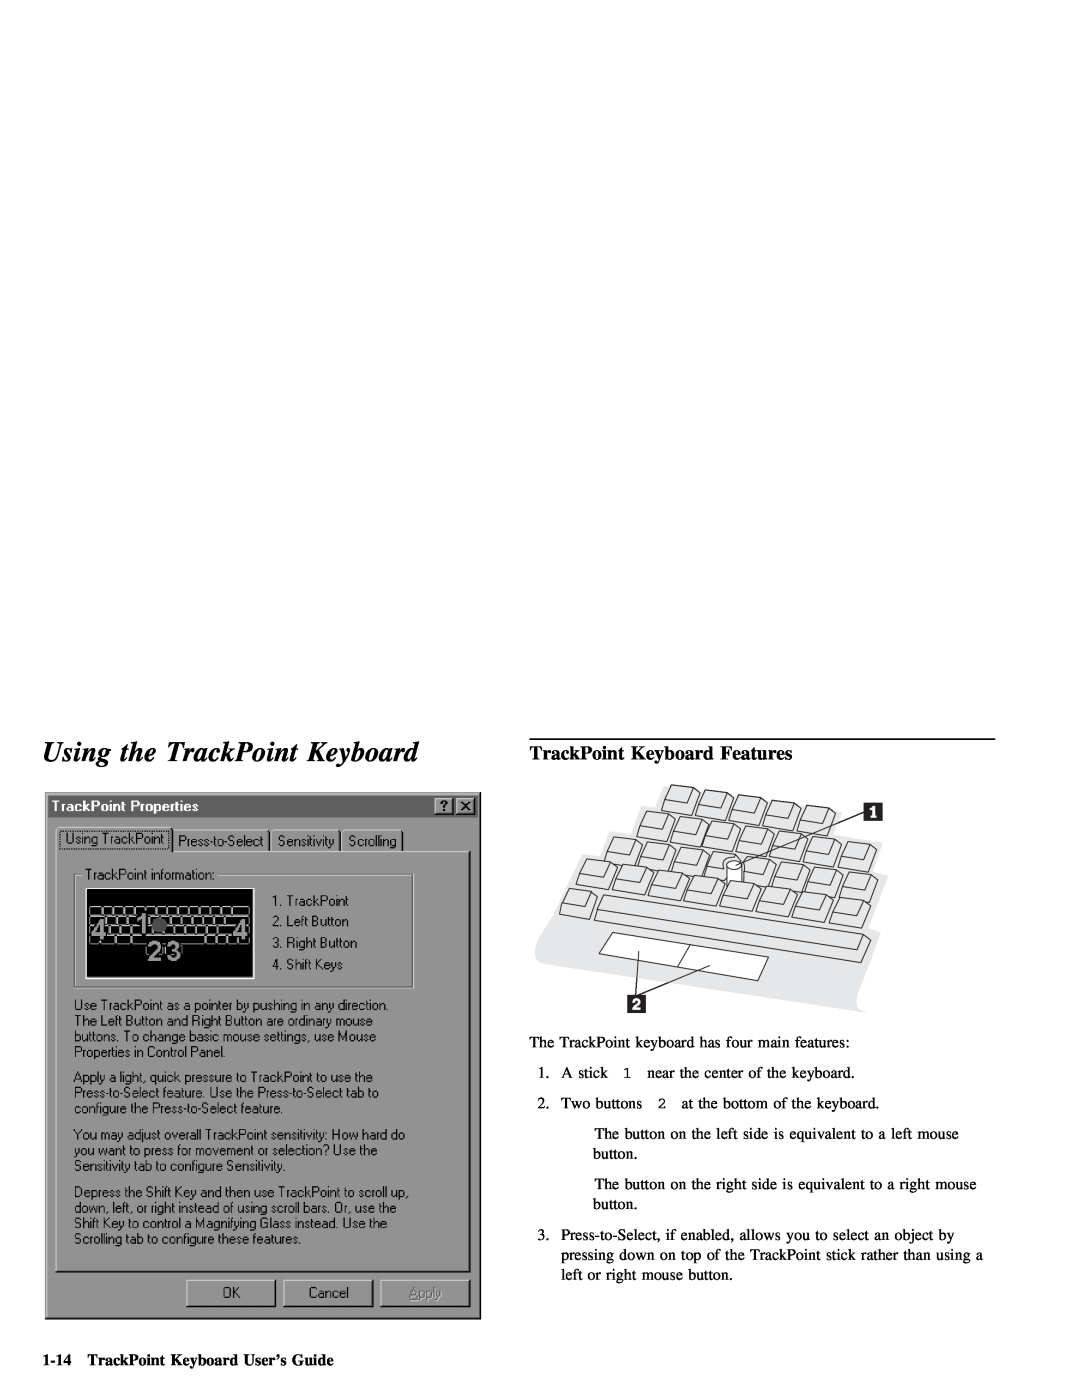 IBM Partner Pavilion manual Using the TrackPoint Keyboard, TrackPoint Keyboard Features 